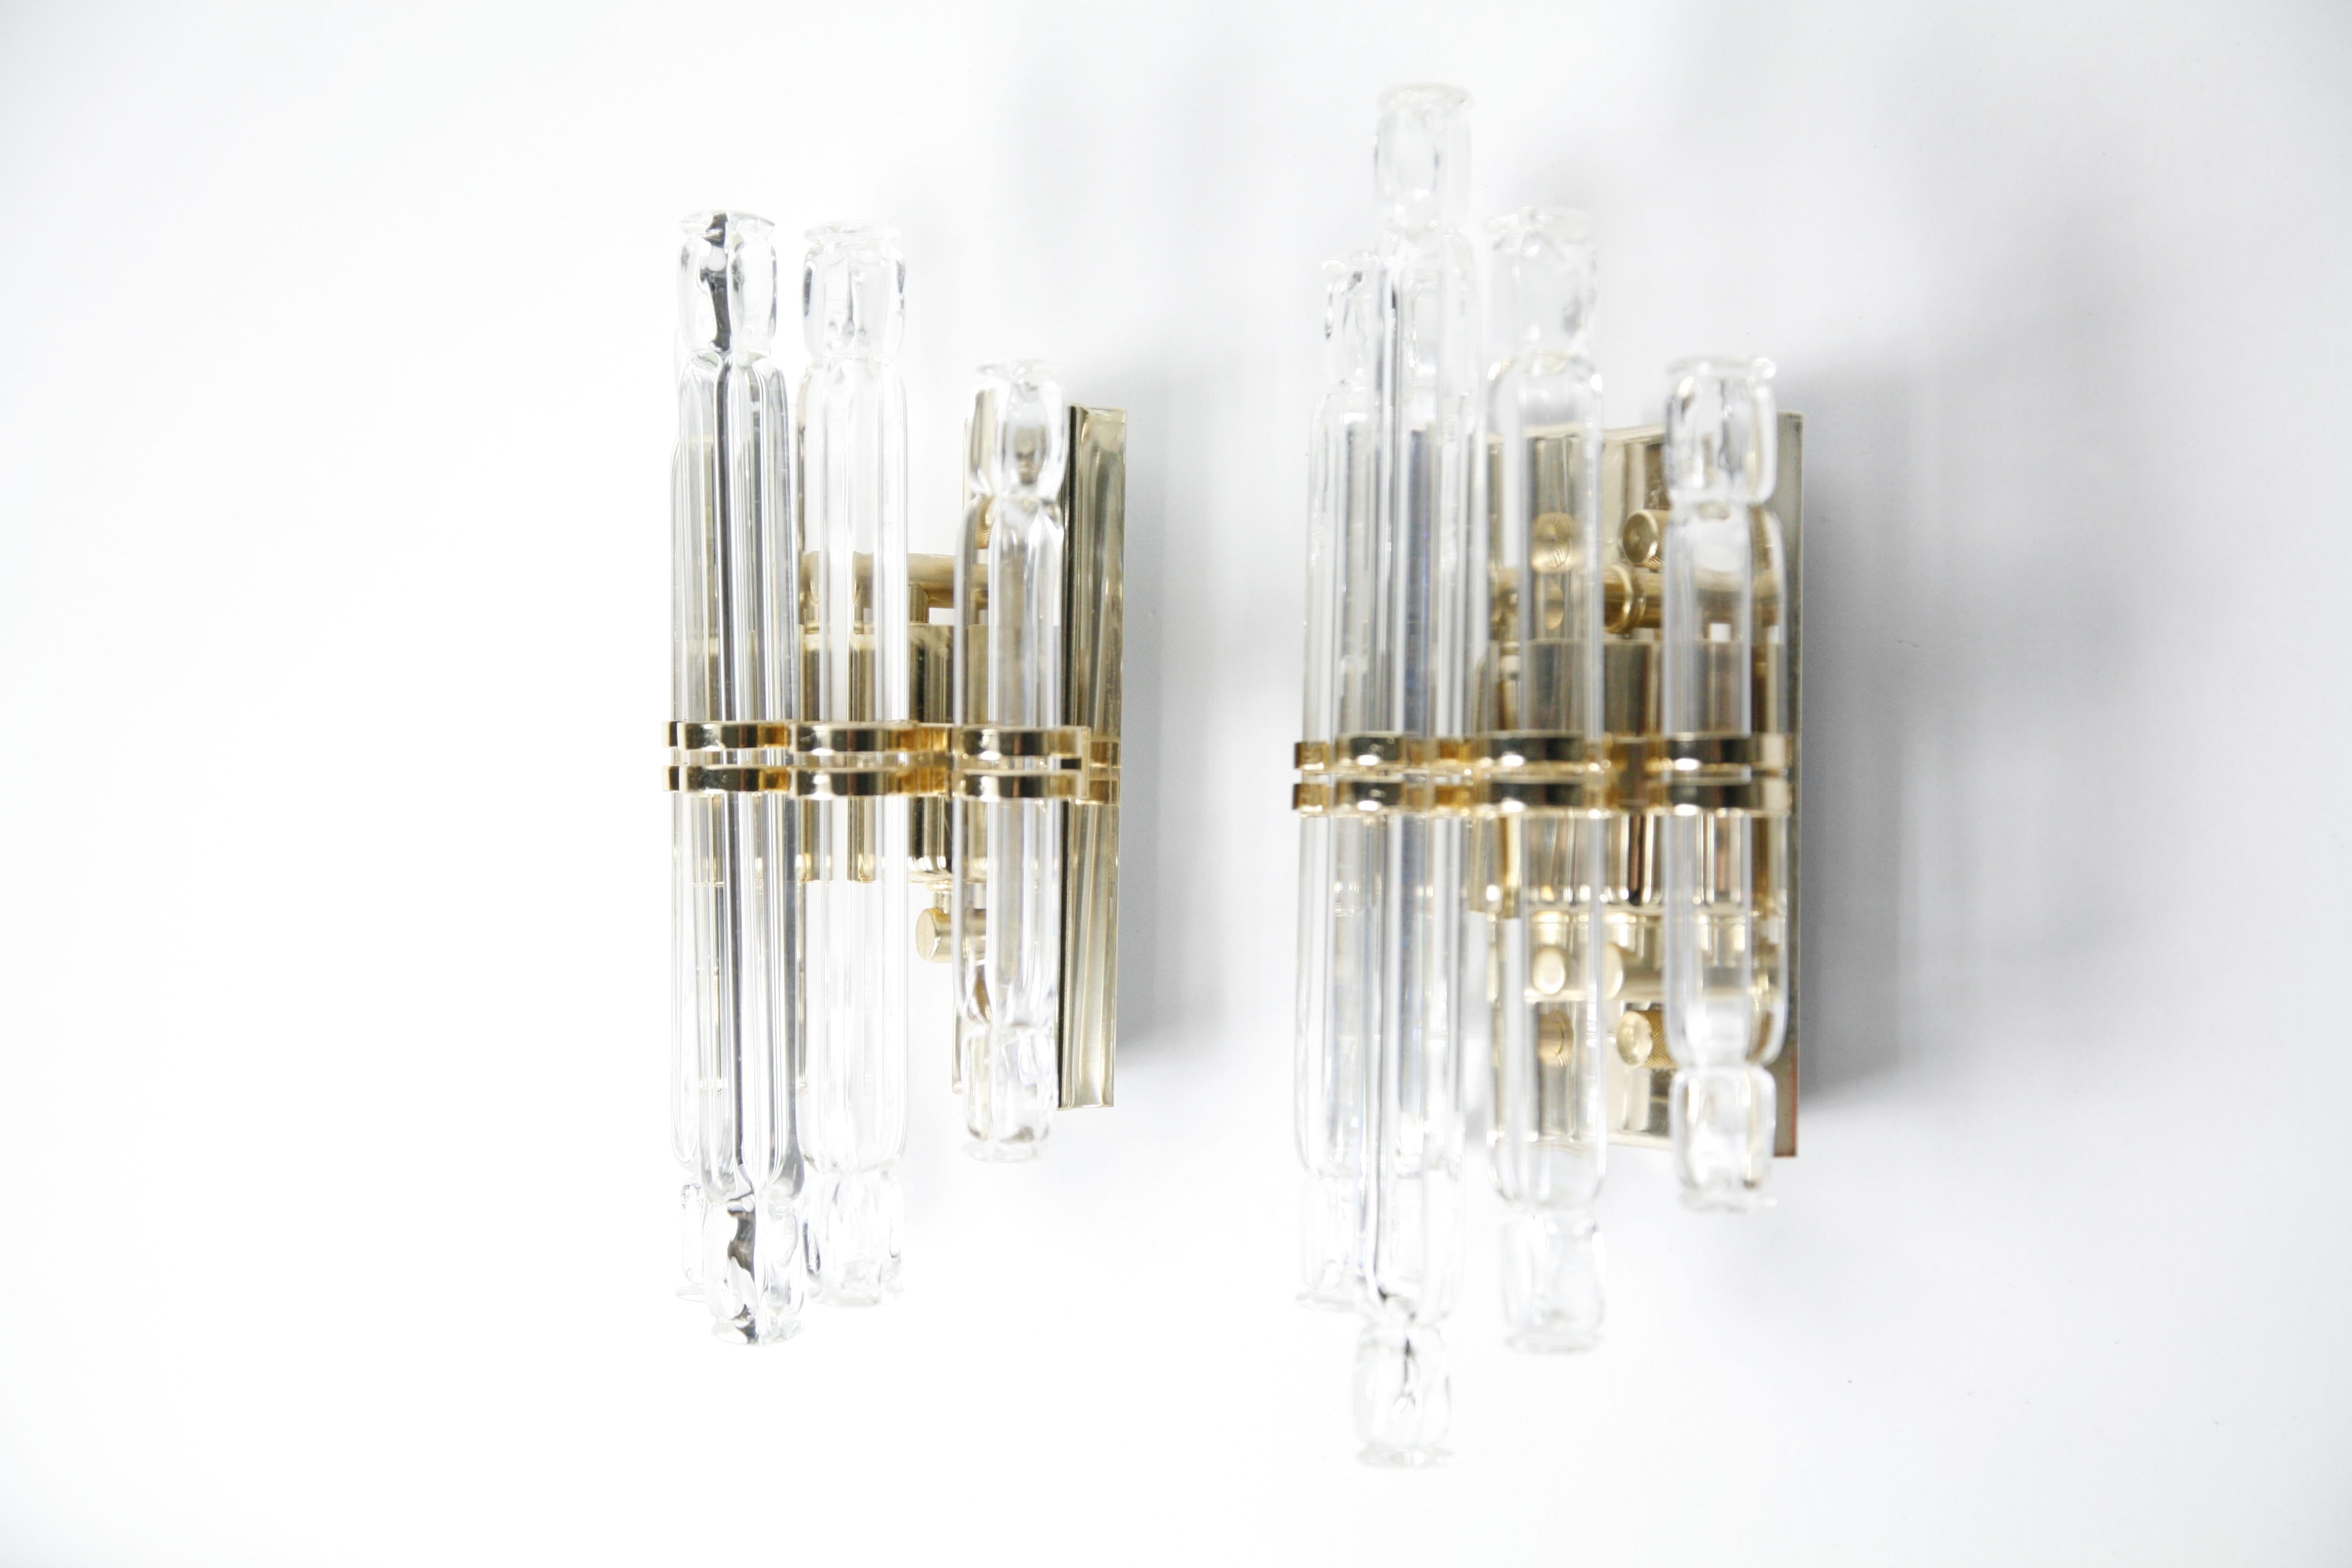 Pair of Kowatz leuchten sconces Germany, 1980, consisting of gilded frames with 5 individual crystal glass rods as a shade, elegant look.
Nicely detailed with tiny gold turn switch.
Hold two candelabra bulbs each, rewired for the US.

The length